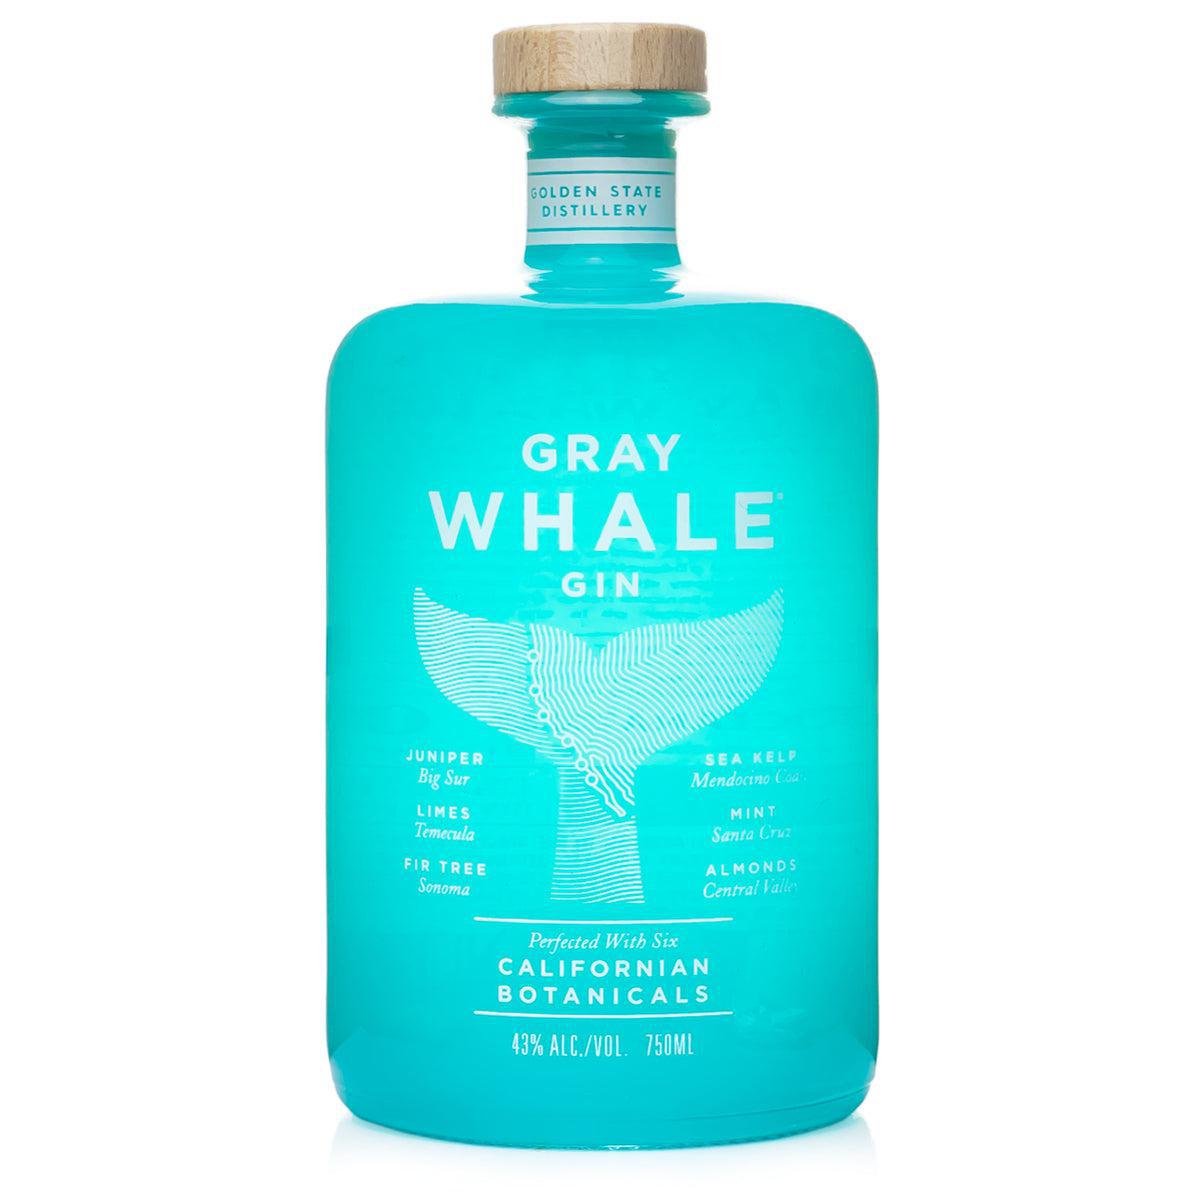 Golden State Distillery - 'Gray Whale' Californian Gin (750ML) by The Epicurean Trader